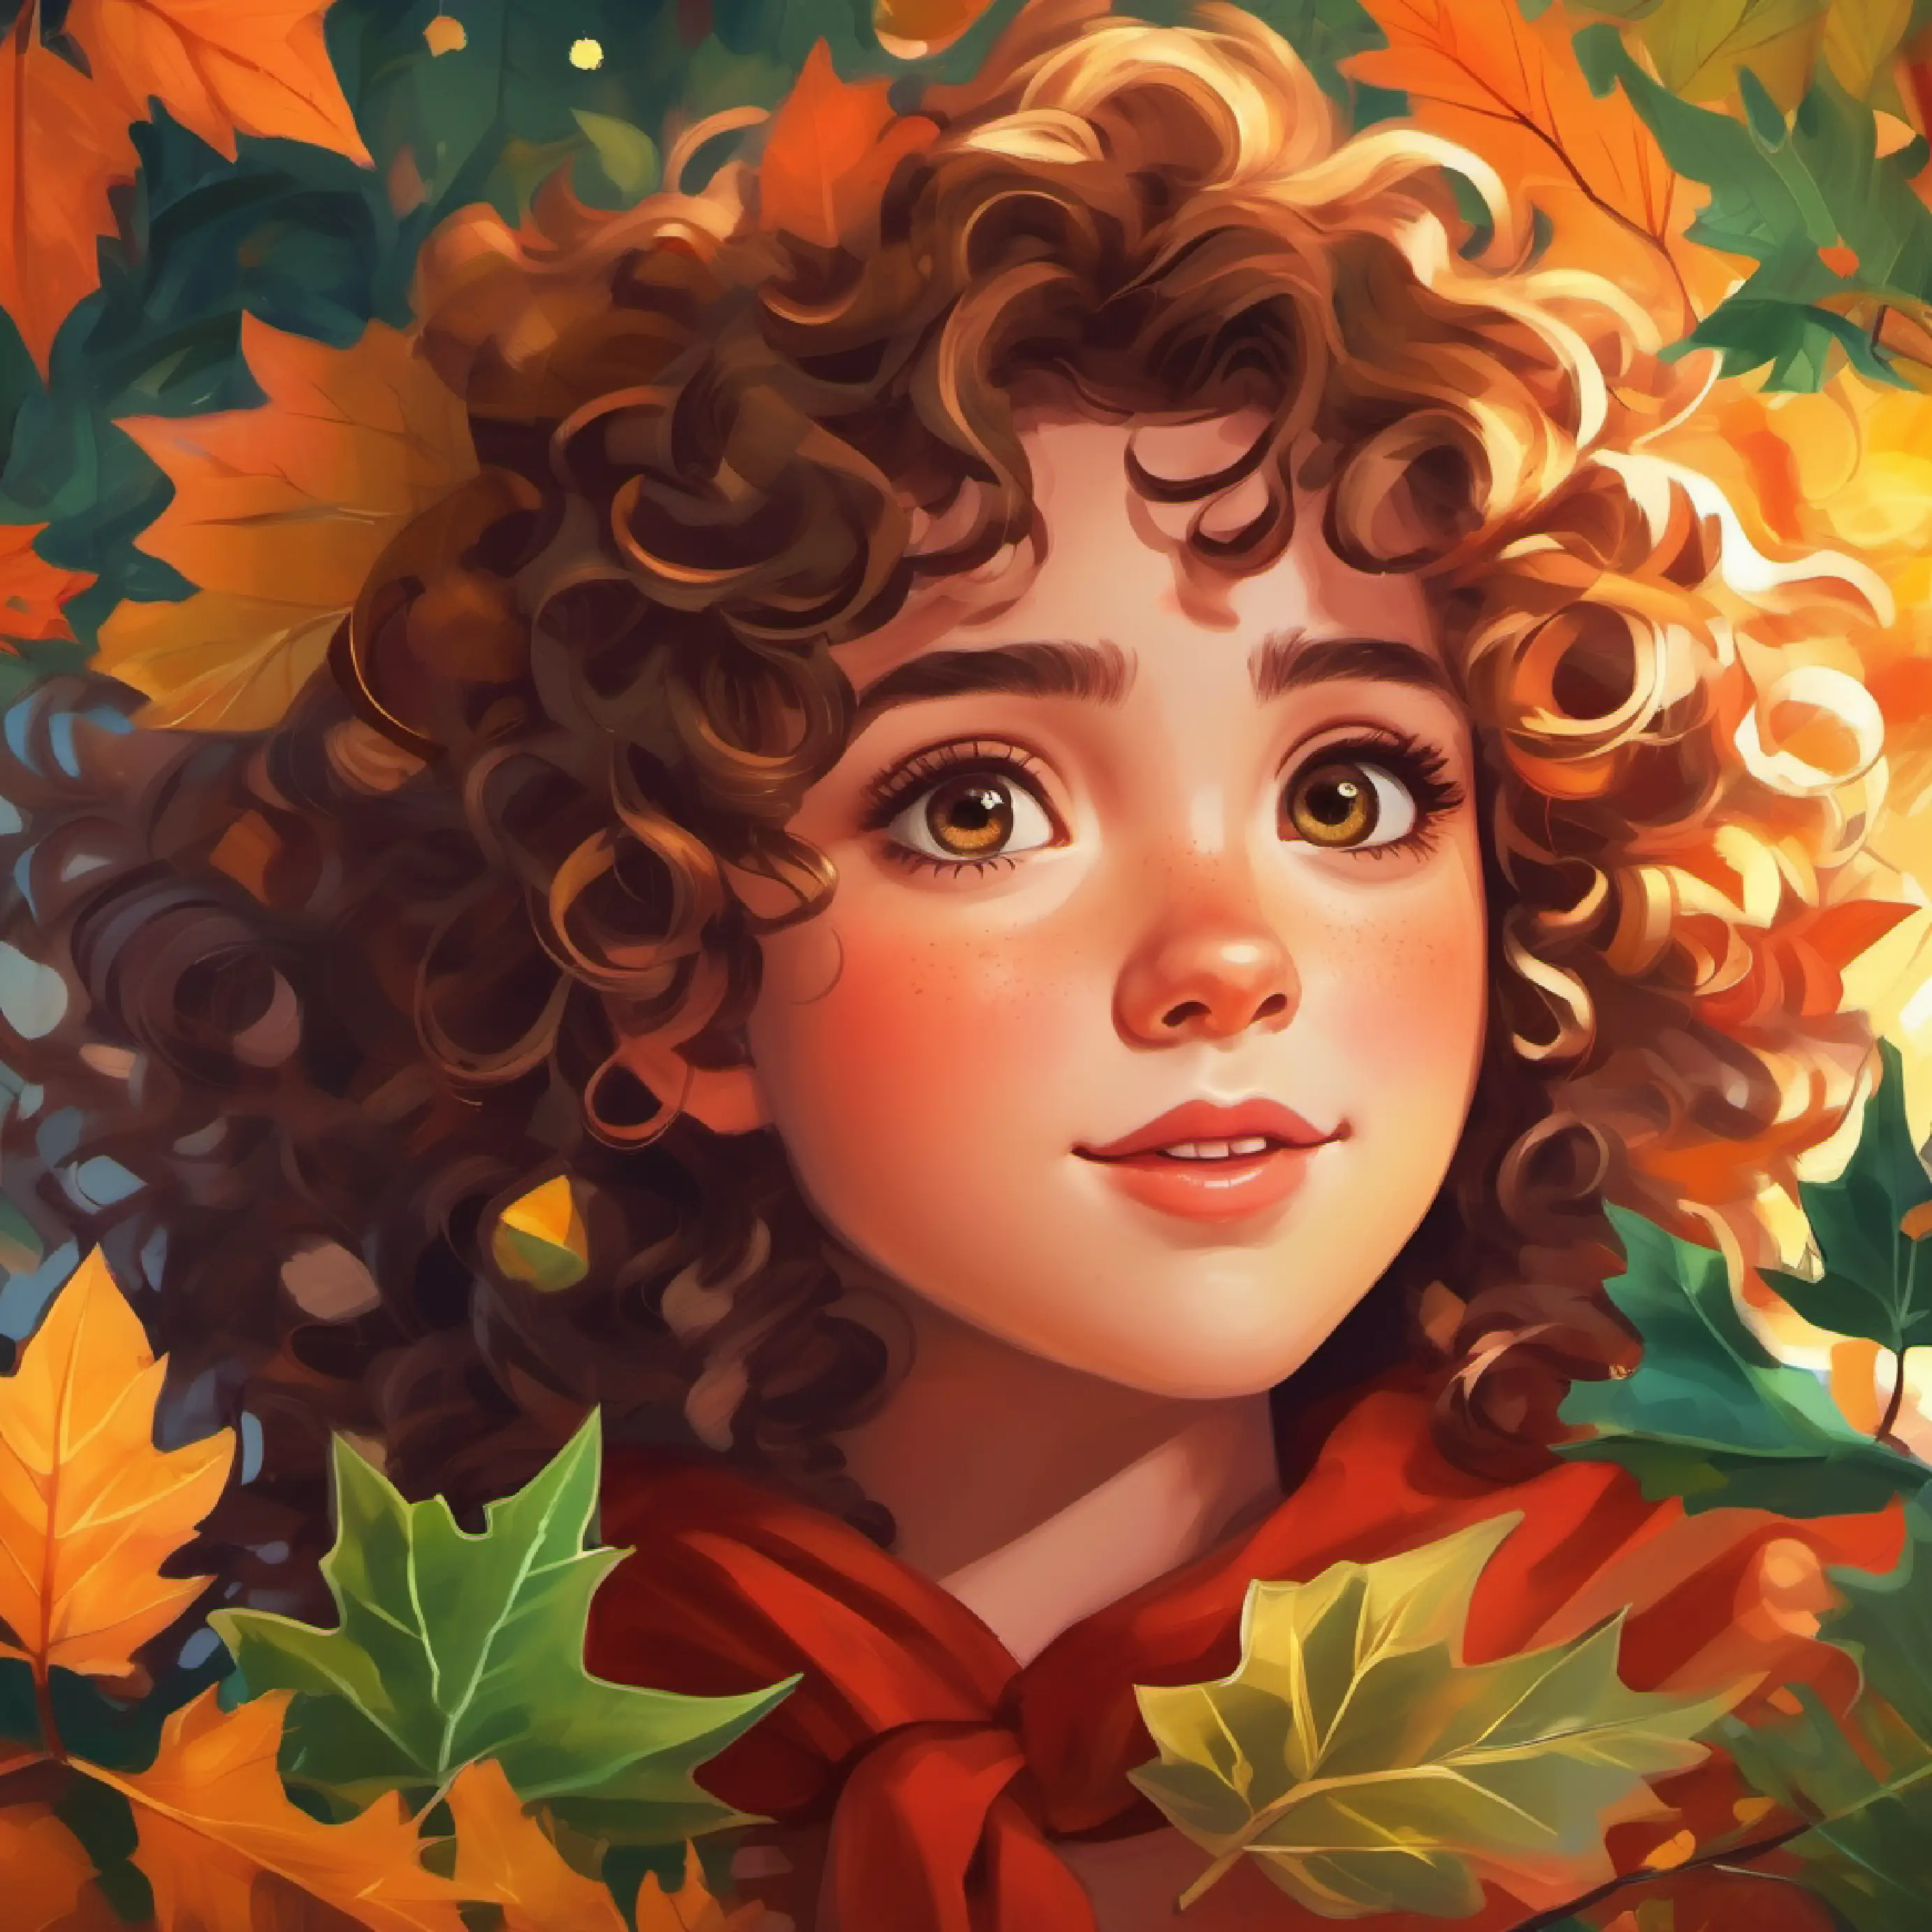 Curly-haired girl with amber eyes, spirited and dreamy leaves feeling fulfilled, curious about future dreams to be shared.